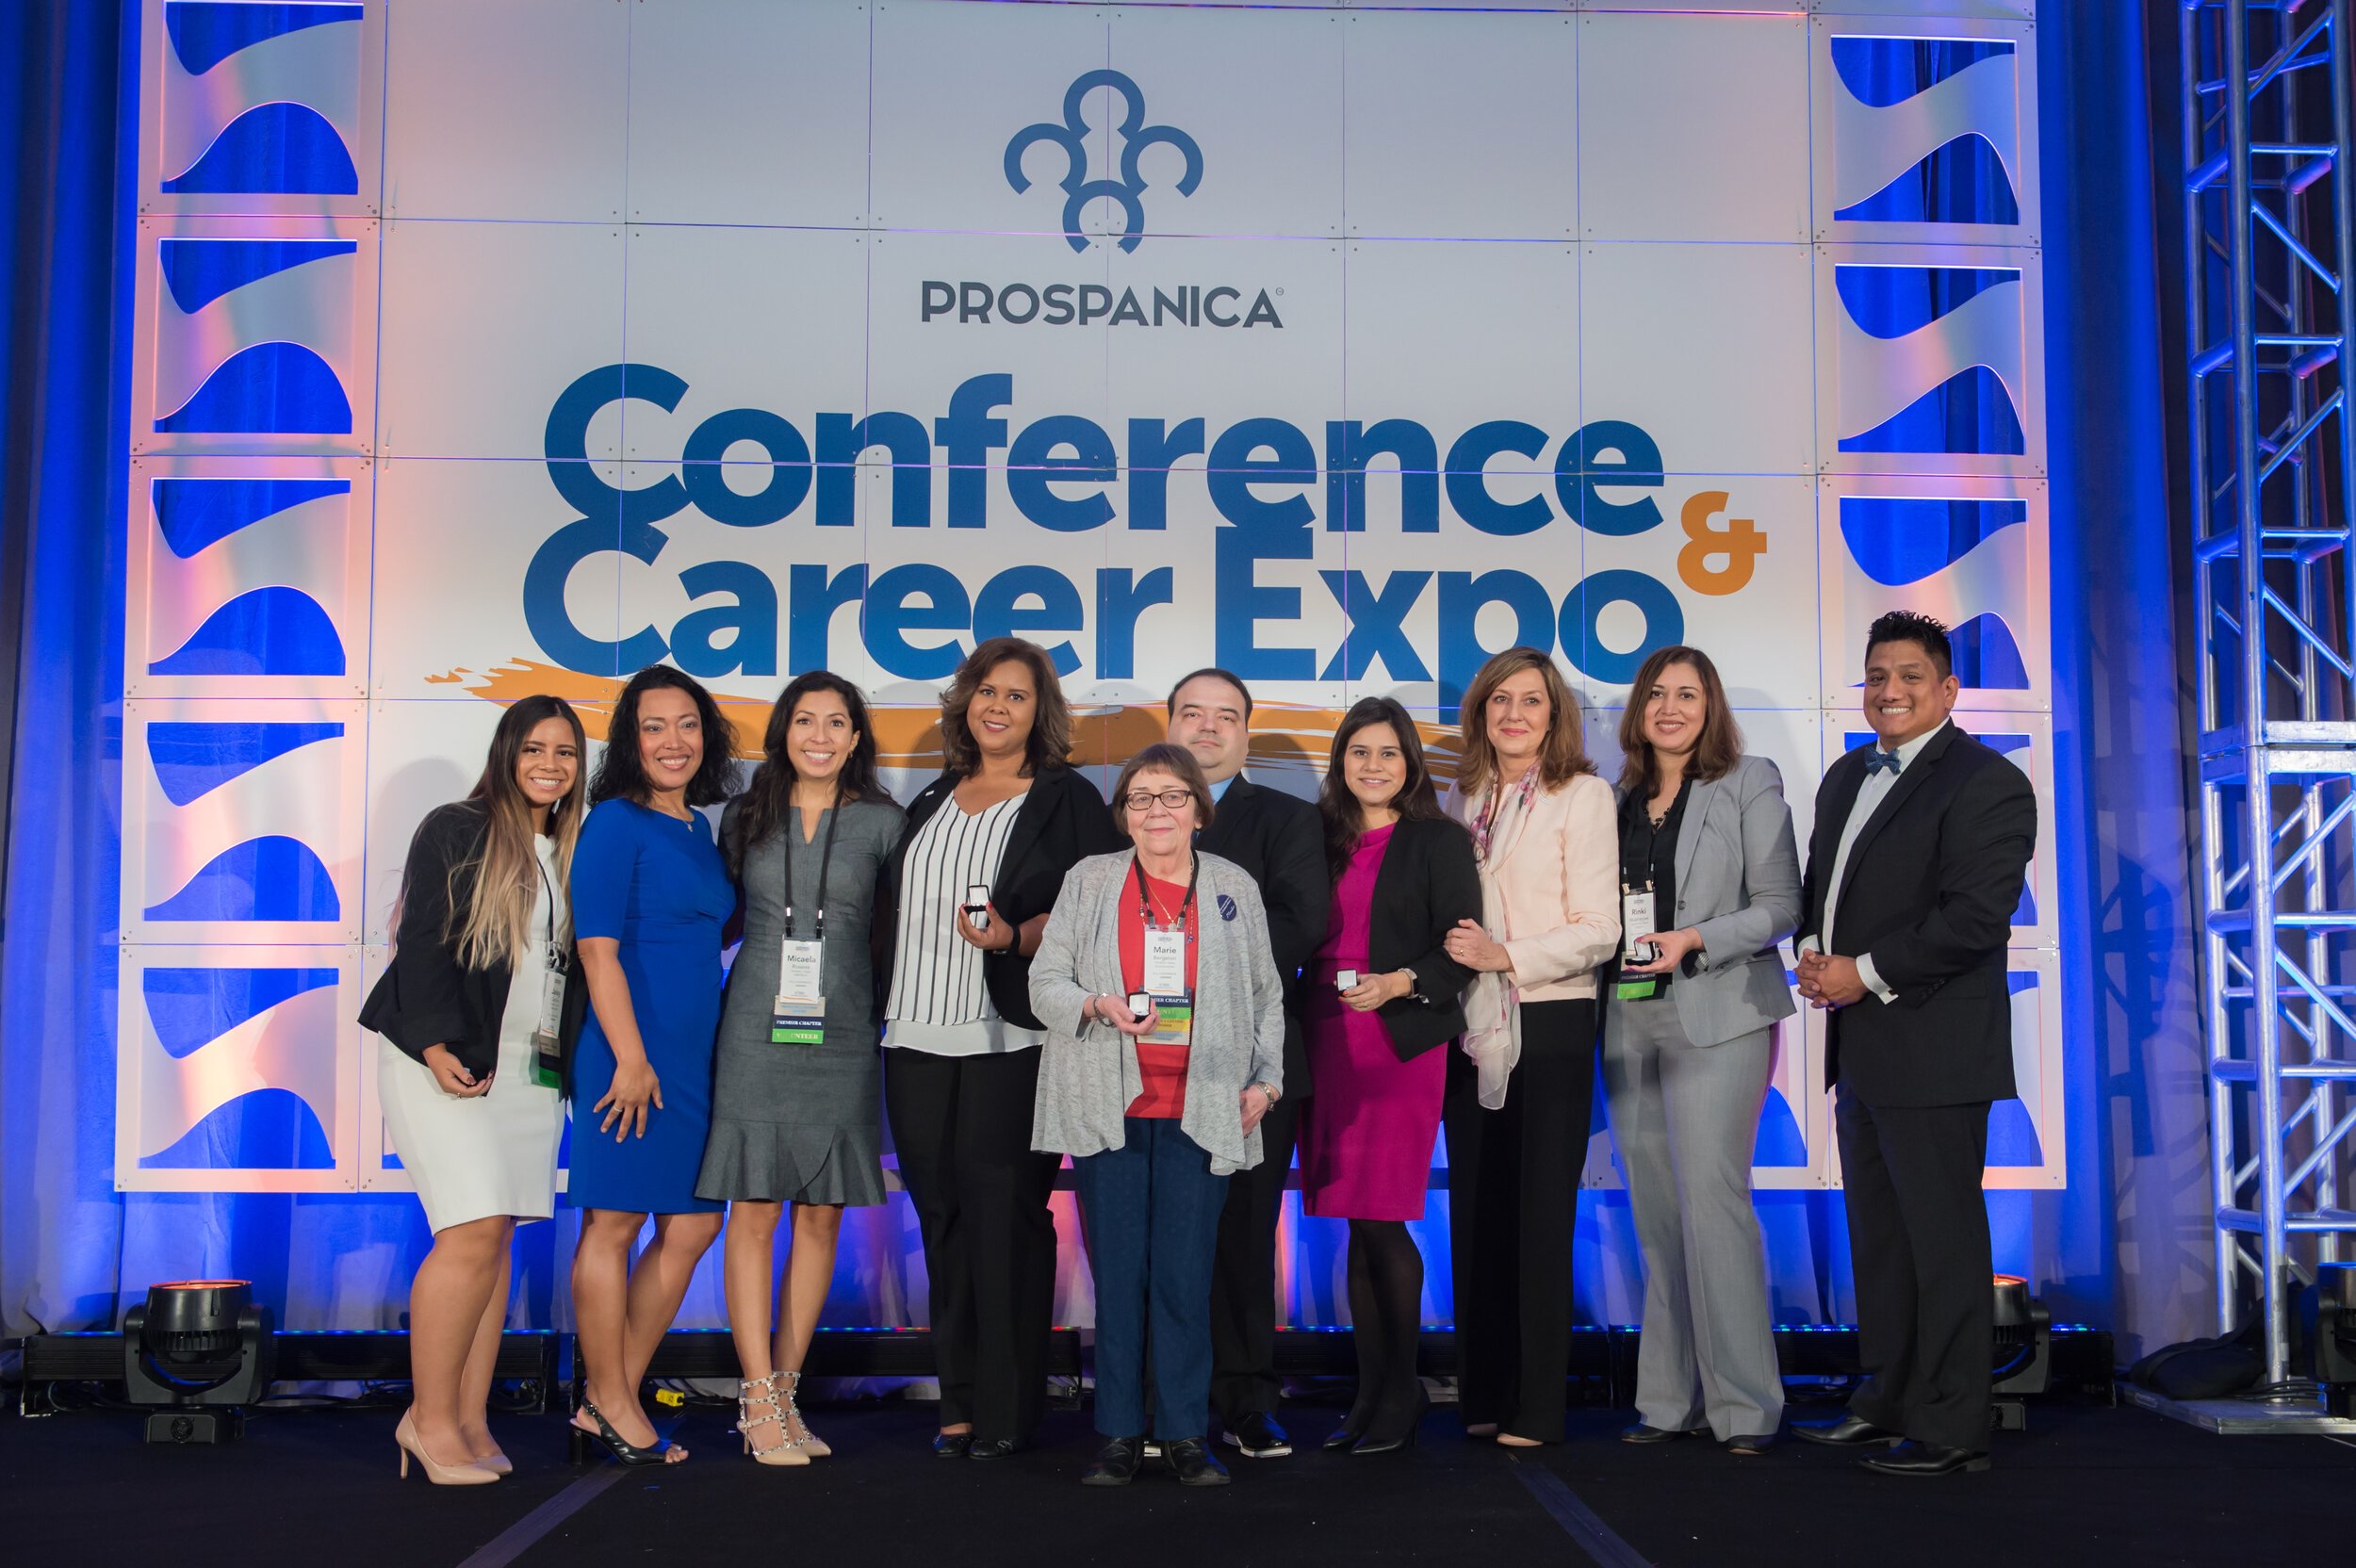 About Conference — Prospanica Conference & Career Expo